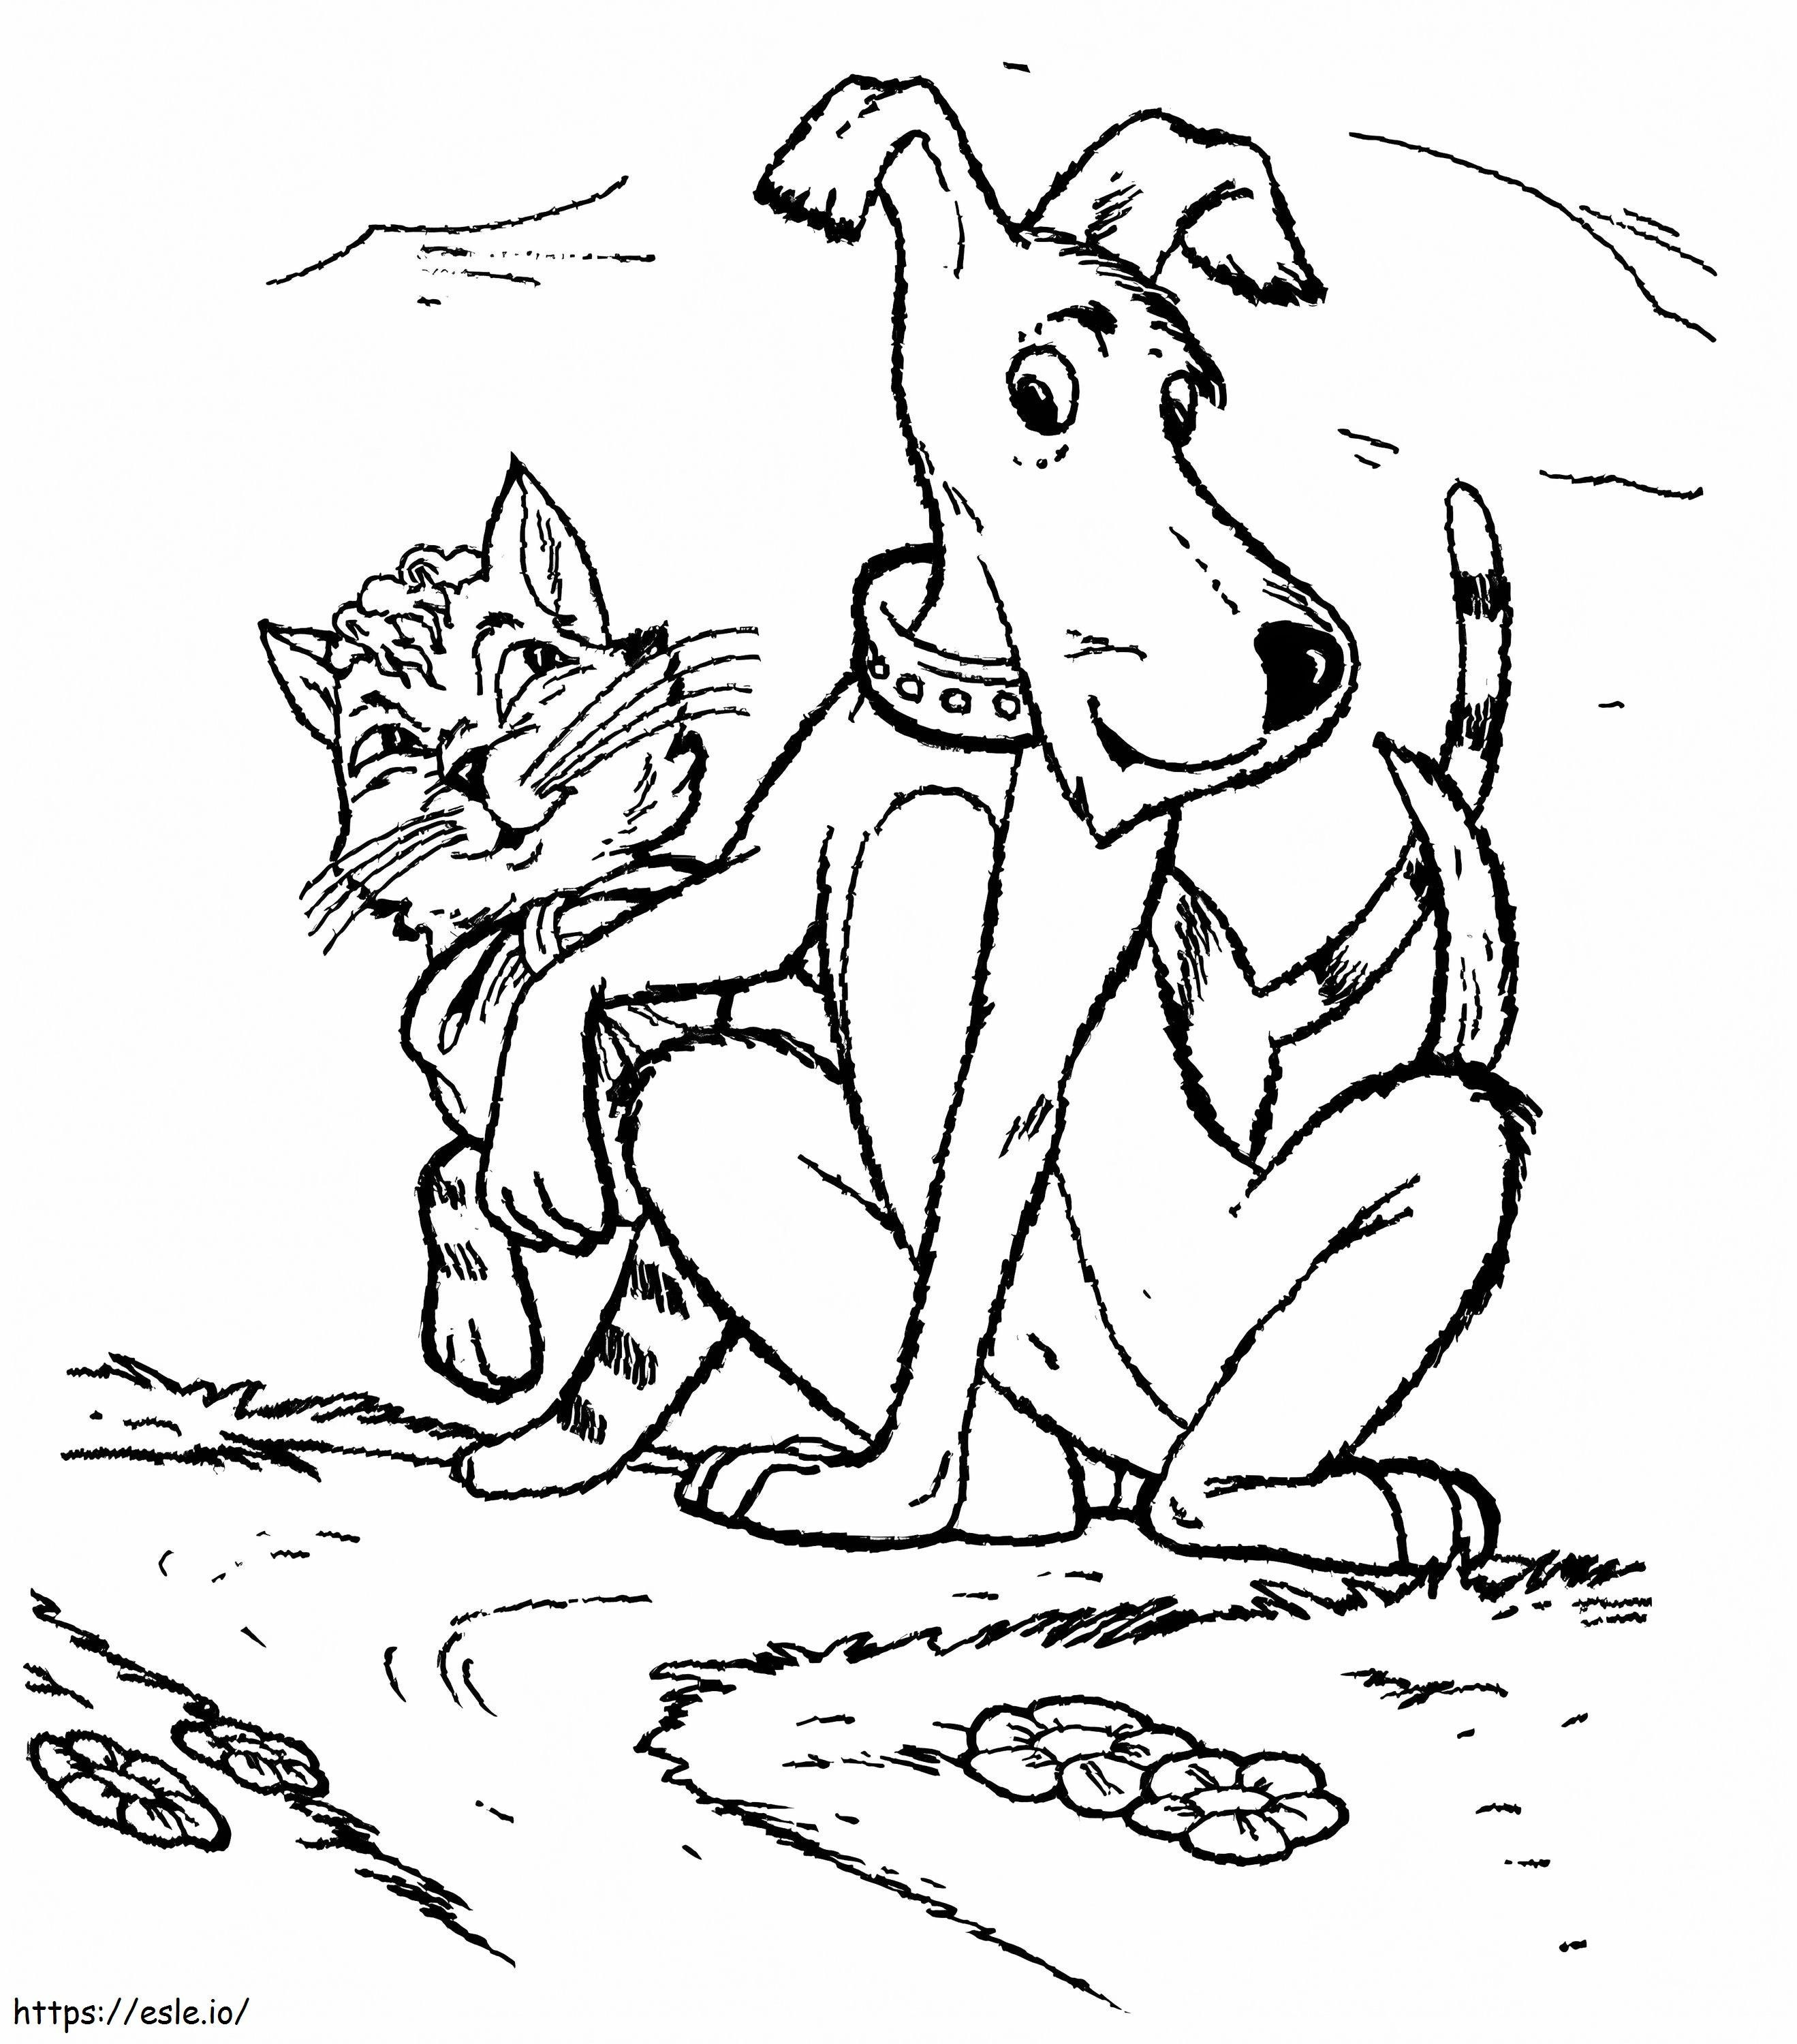 Dog And Cat Are Friends coloring page